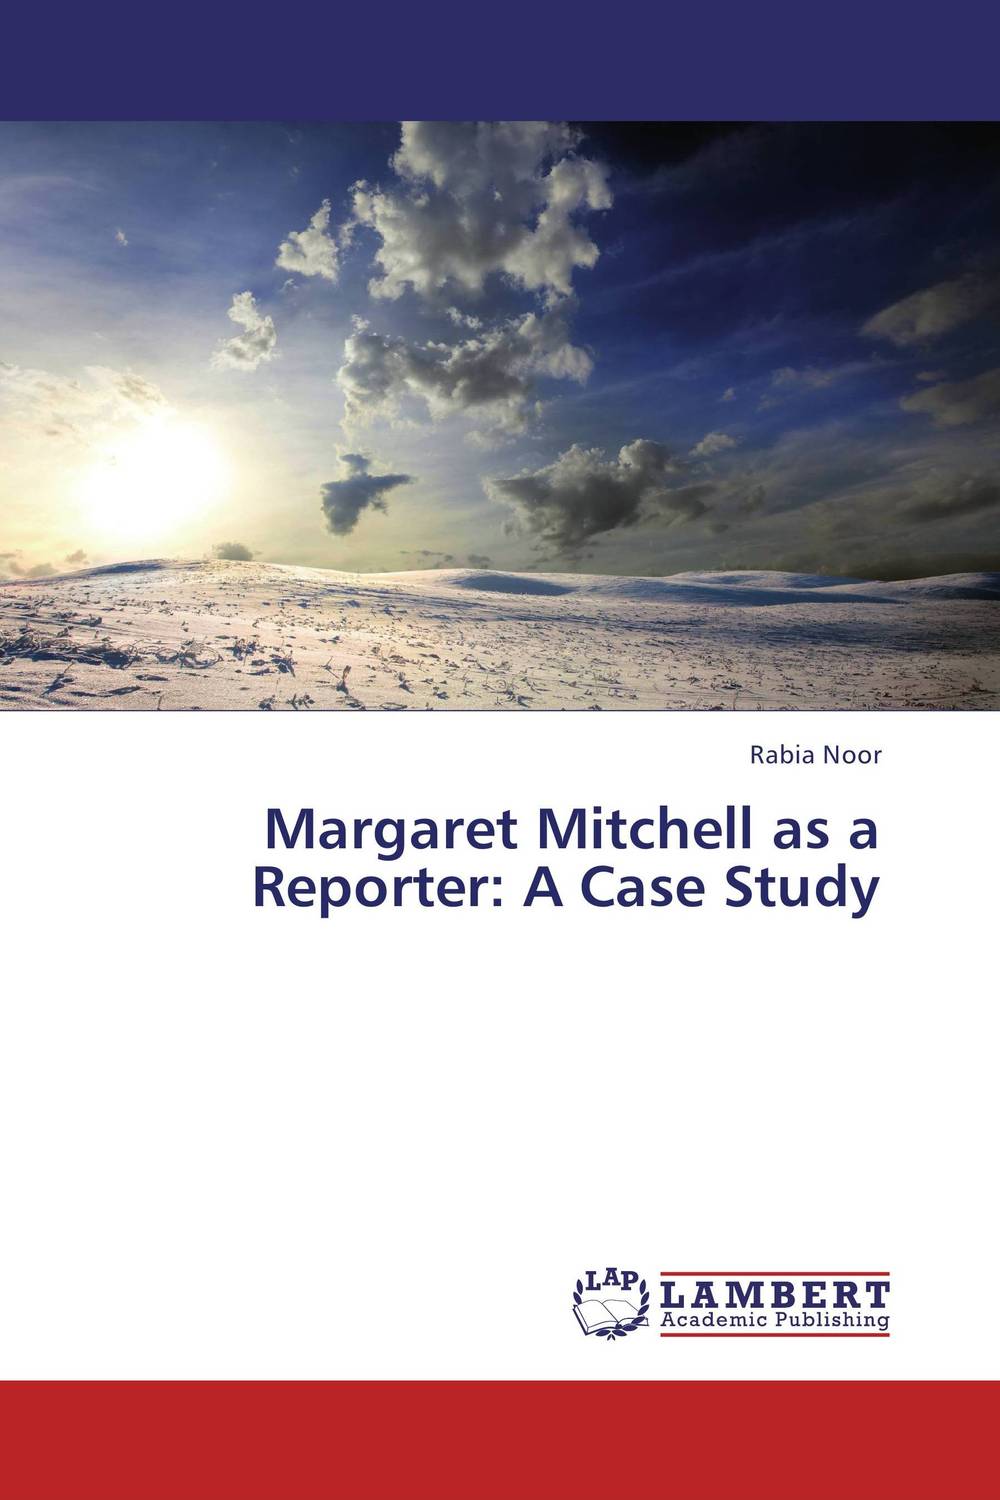 Margaret Mitchell as a Reporter: A Case Study